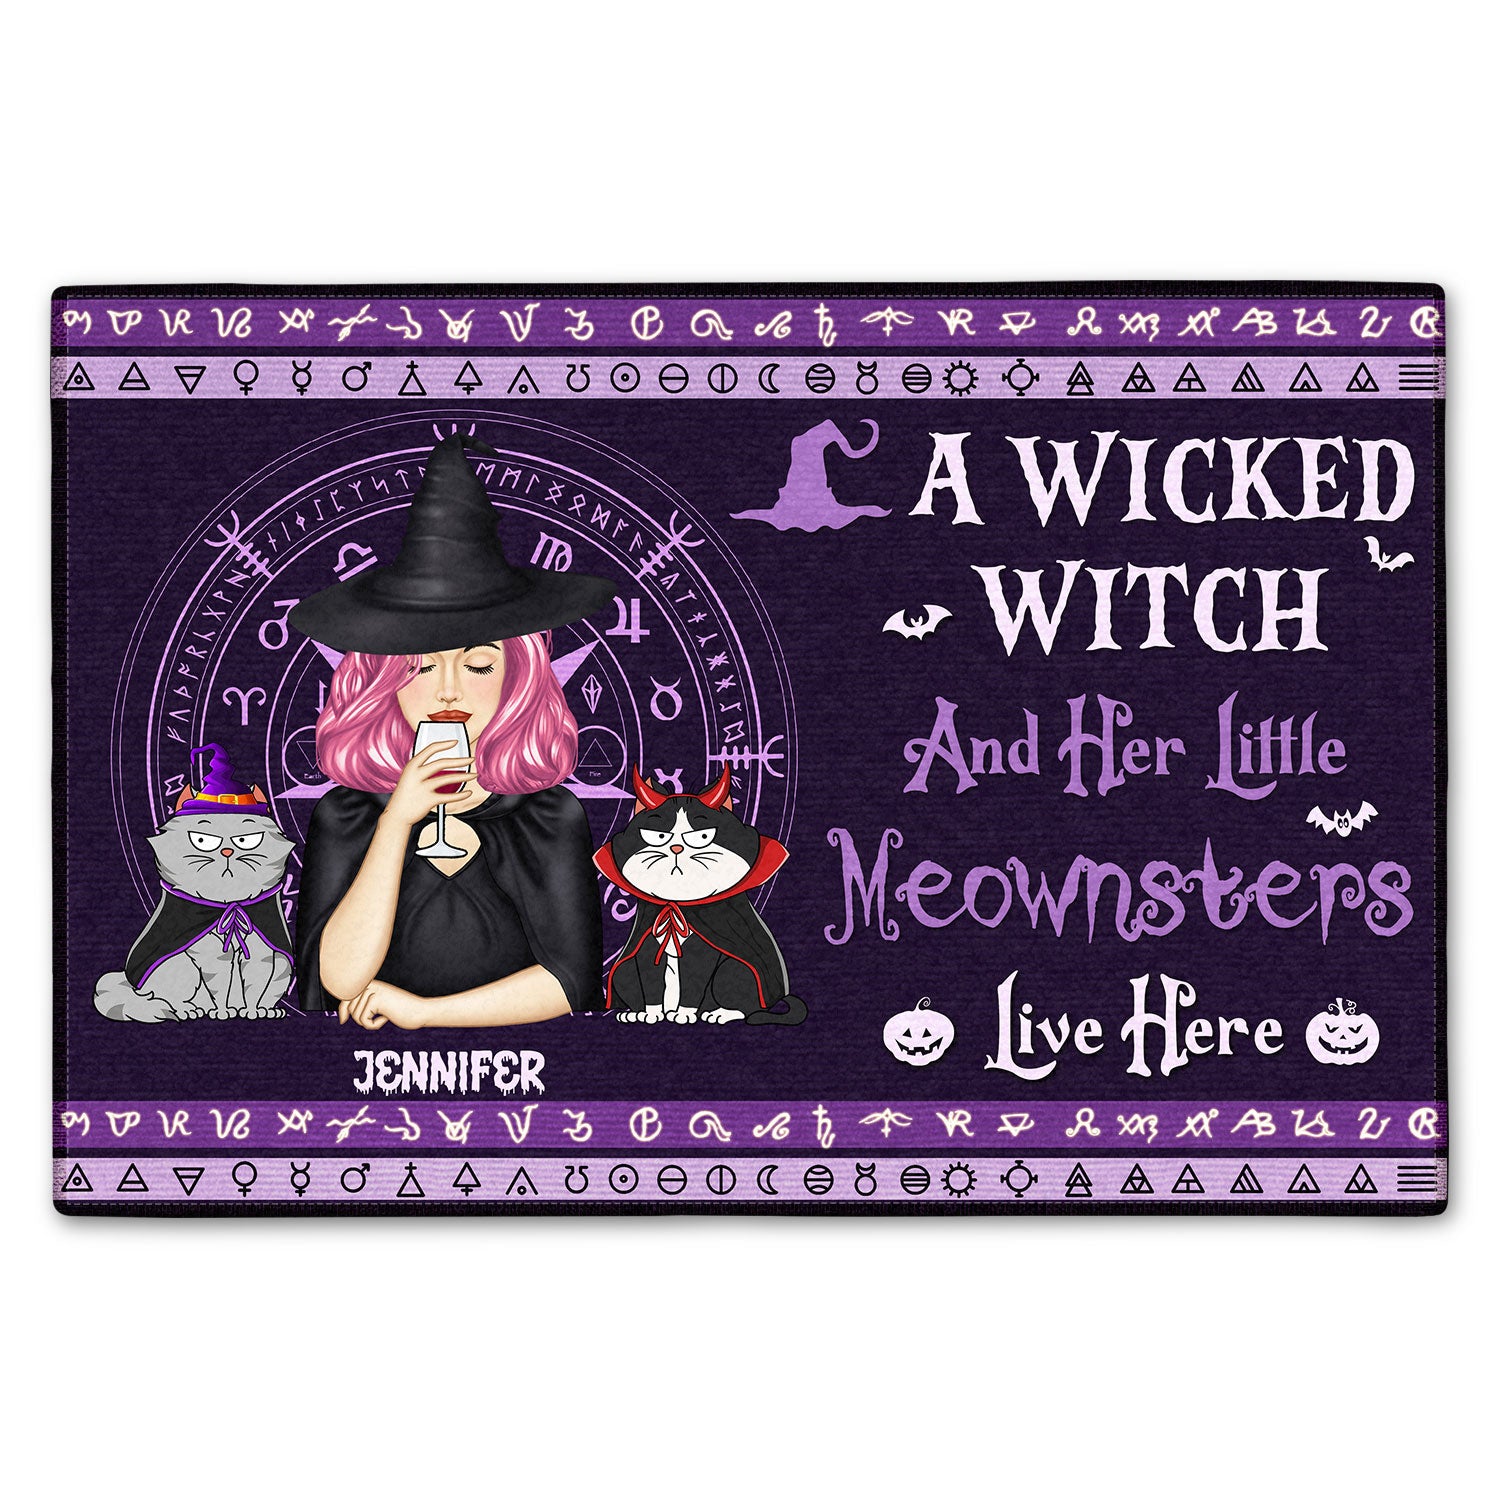 A Wicked Witch And Her Little Meownsters Live Here - Halloween Home Decor Gift For Cat Lovers, Women, Yourself - Personalized Doormat